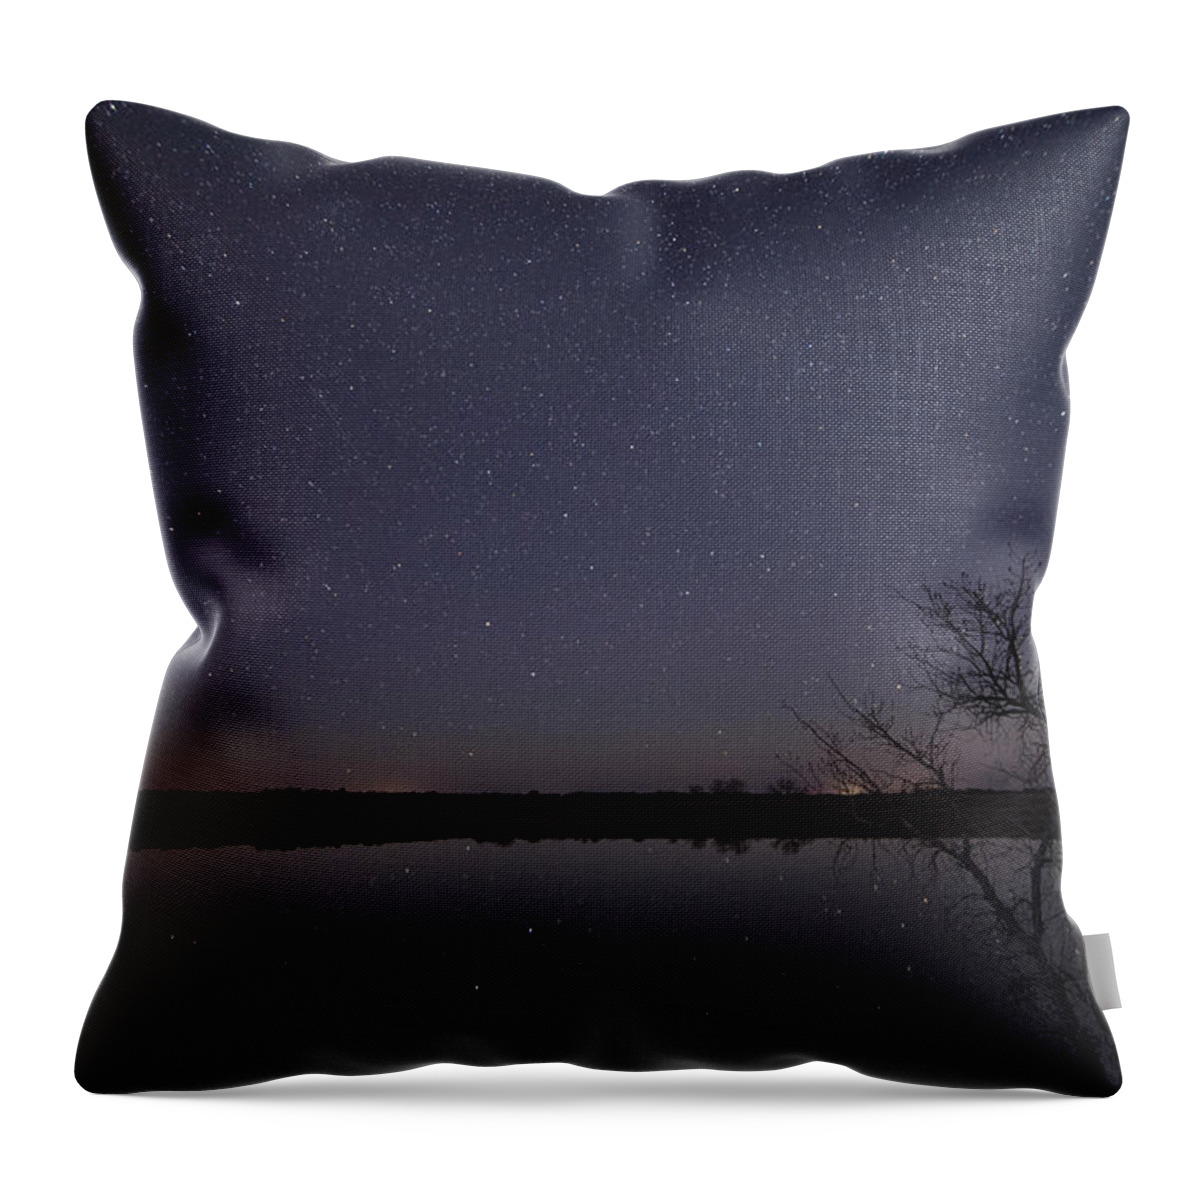 Alone Throw Pillow featuring the photograph Night Sky Reflection by Melany Sarafis